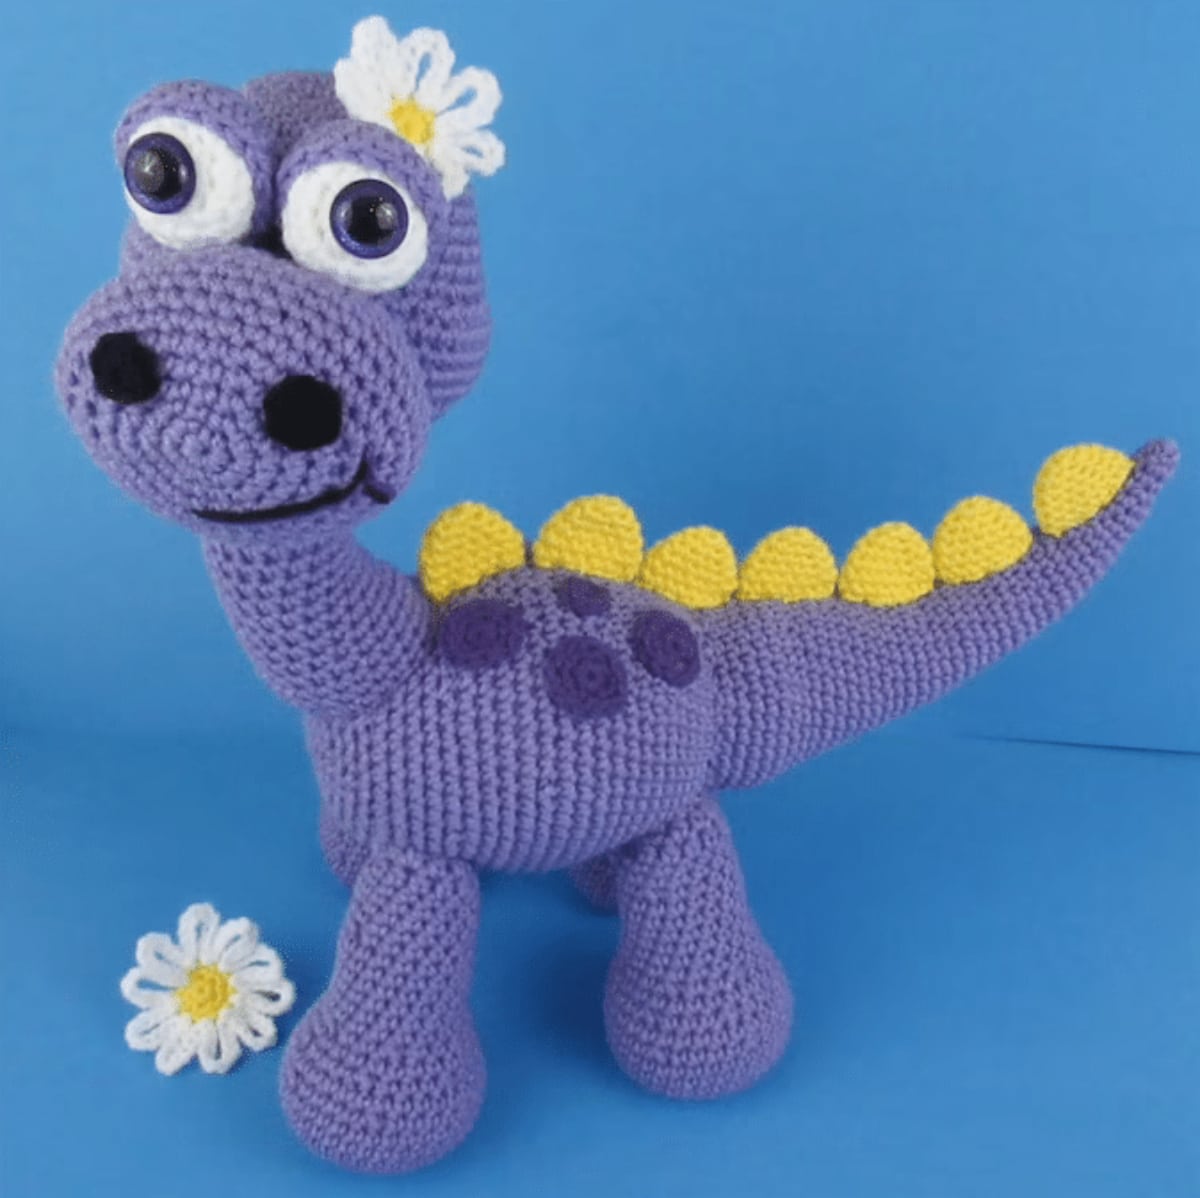 Crochet purple stuffed dinosaur with large black and white eyes, yellow spikes down its back and tail, and a daisy on its head.